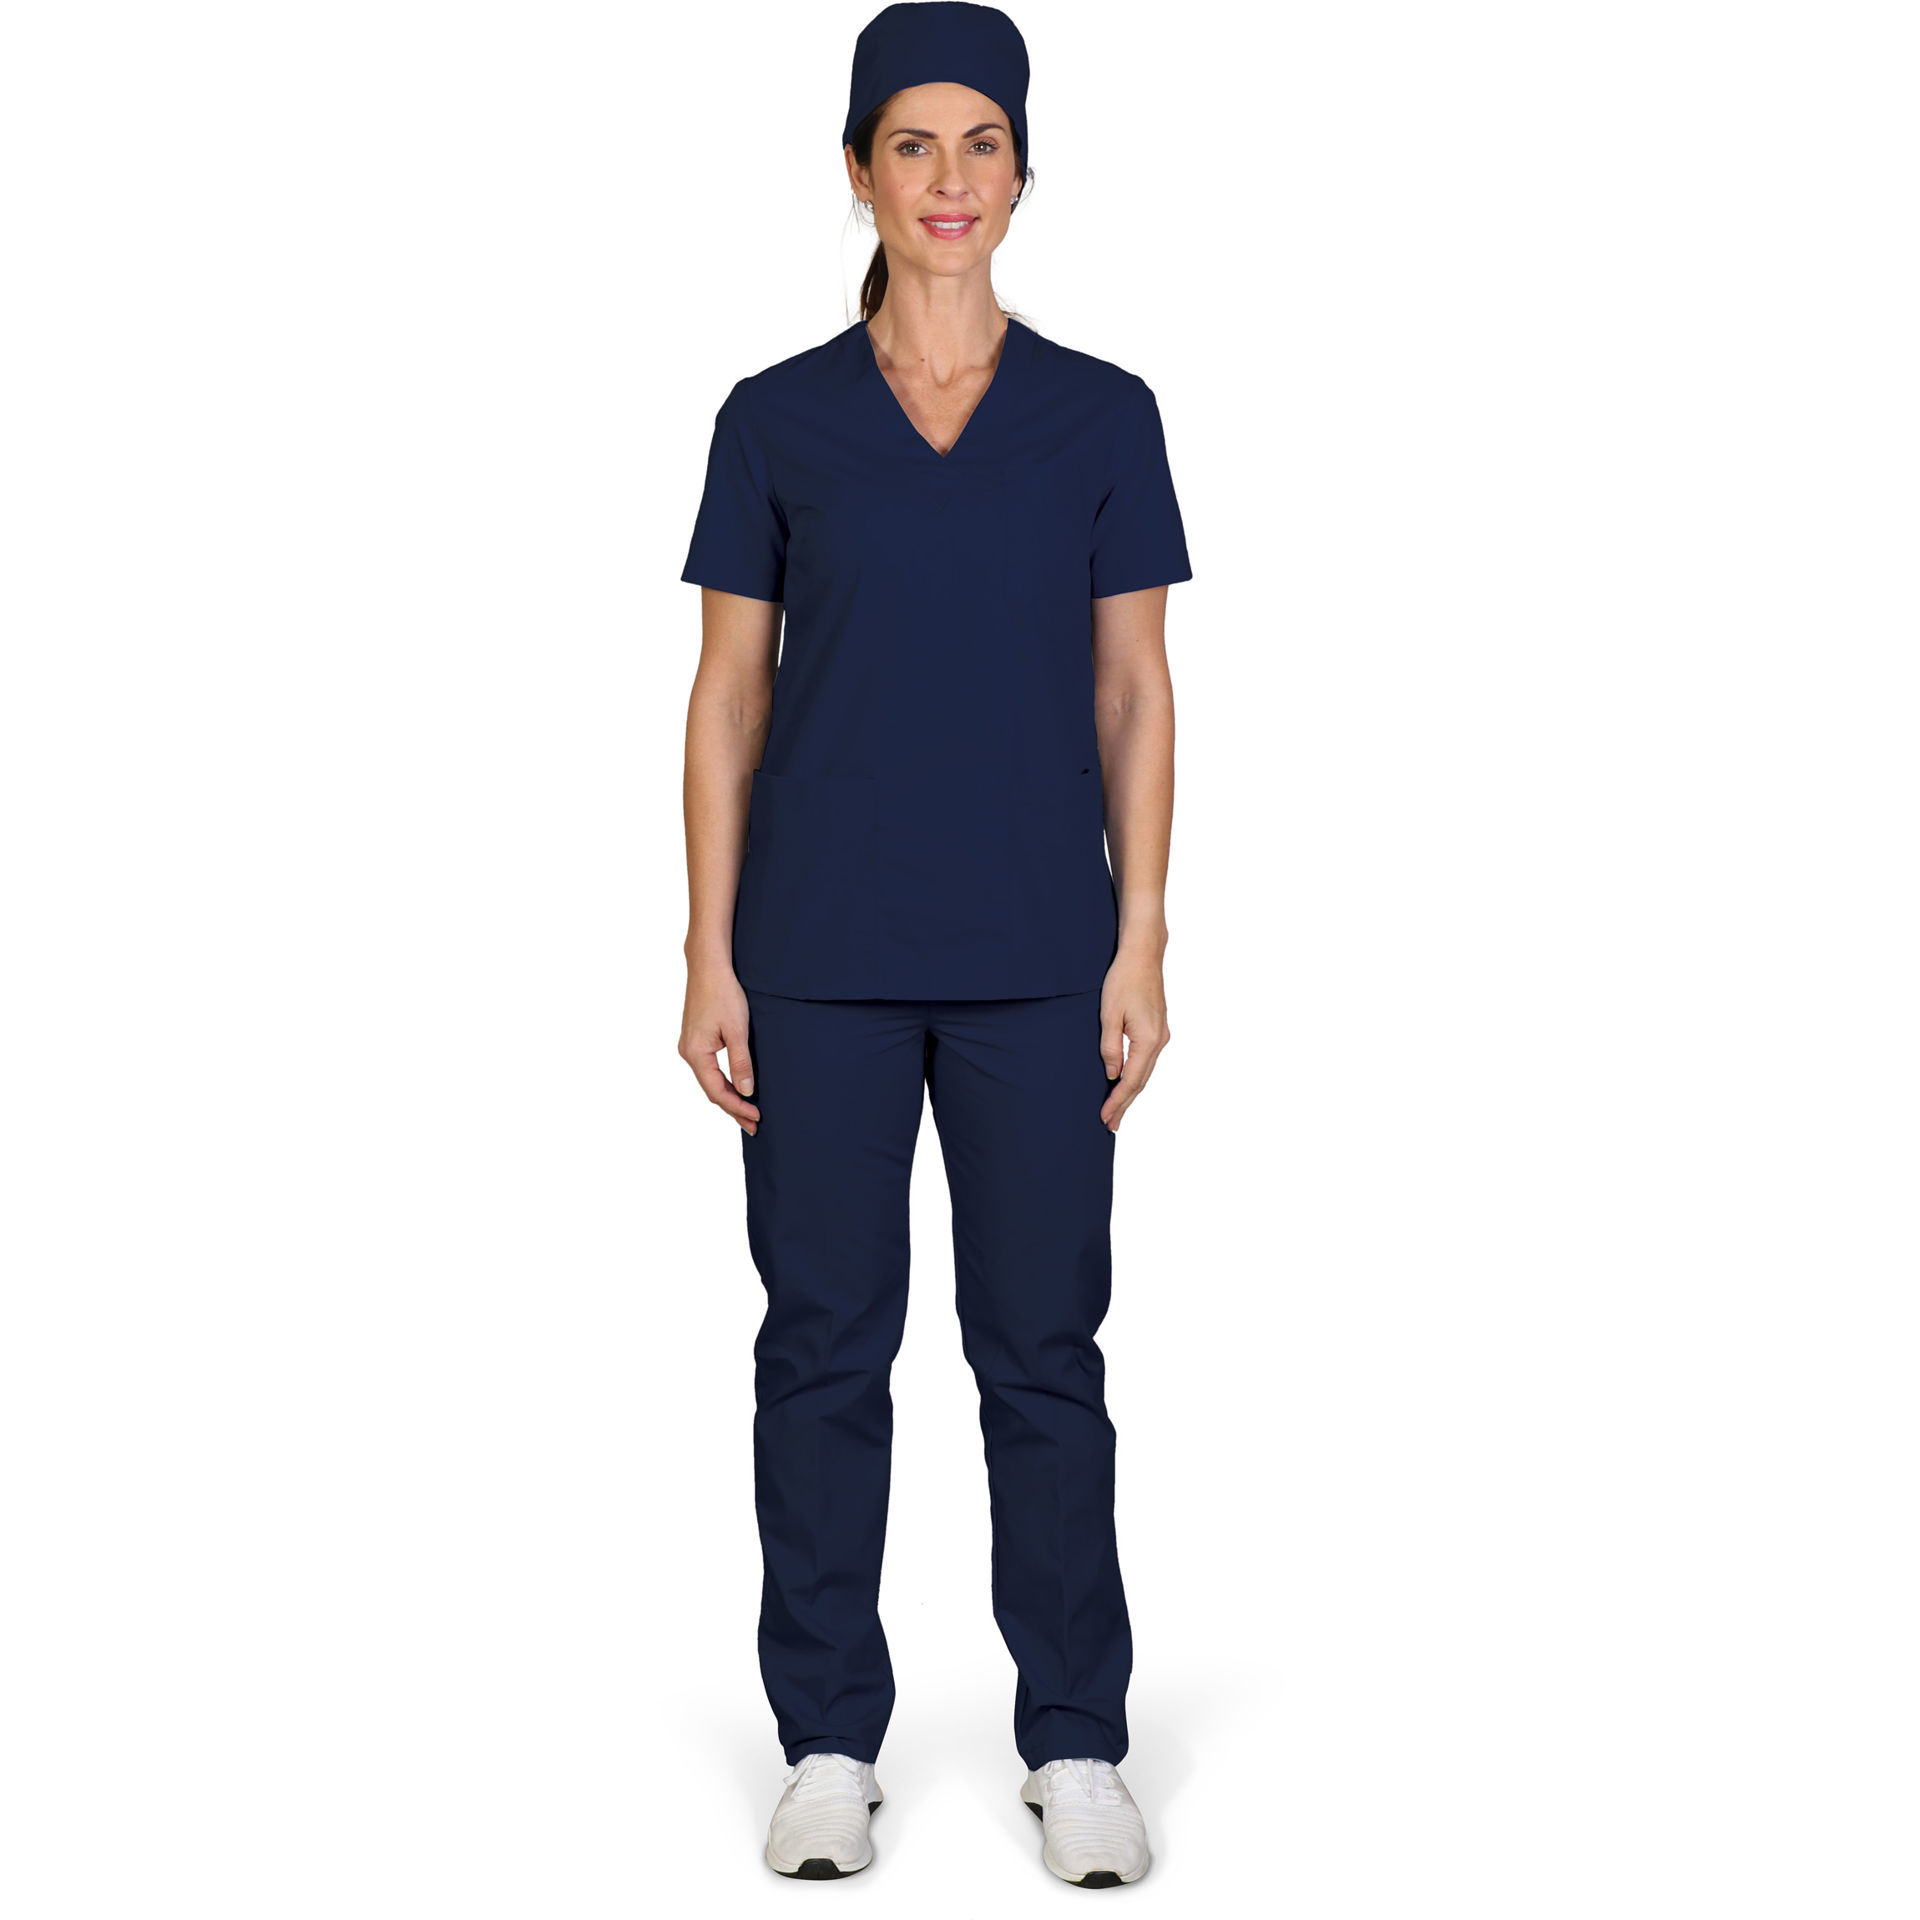 Global Citizen Inc. - Manufacturers and suppliers of promotional, corporate  and uniform apparel.. -Terry Ladies Scrub Pants